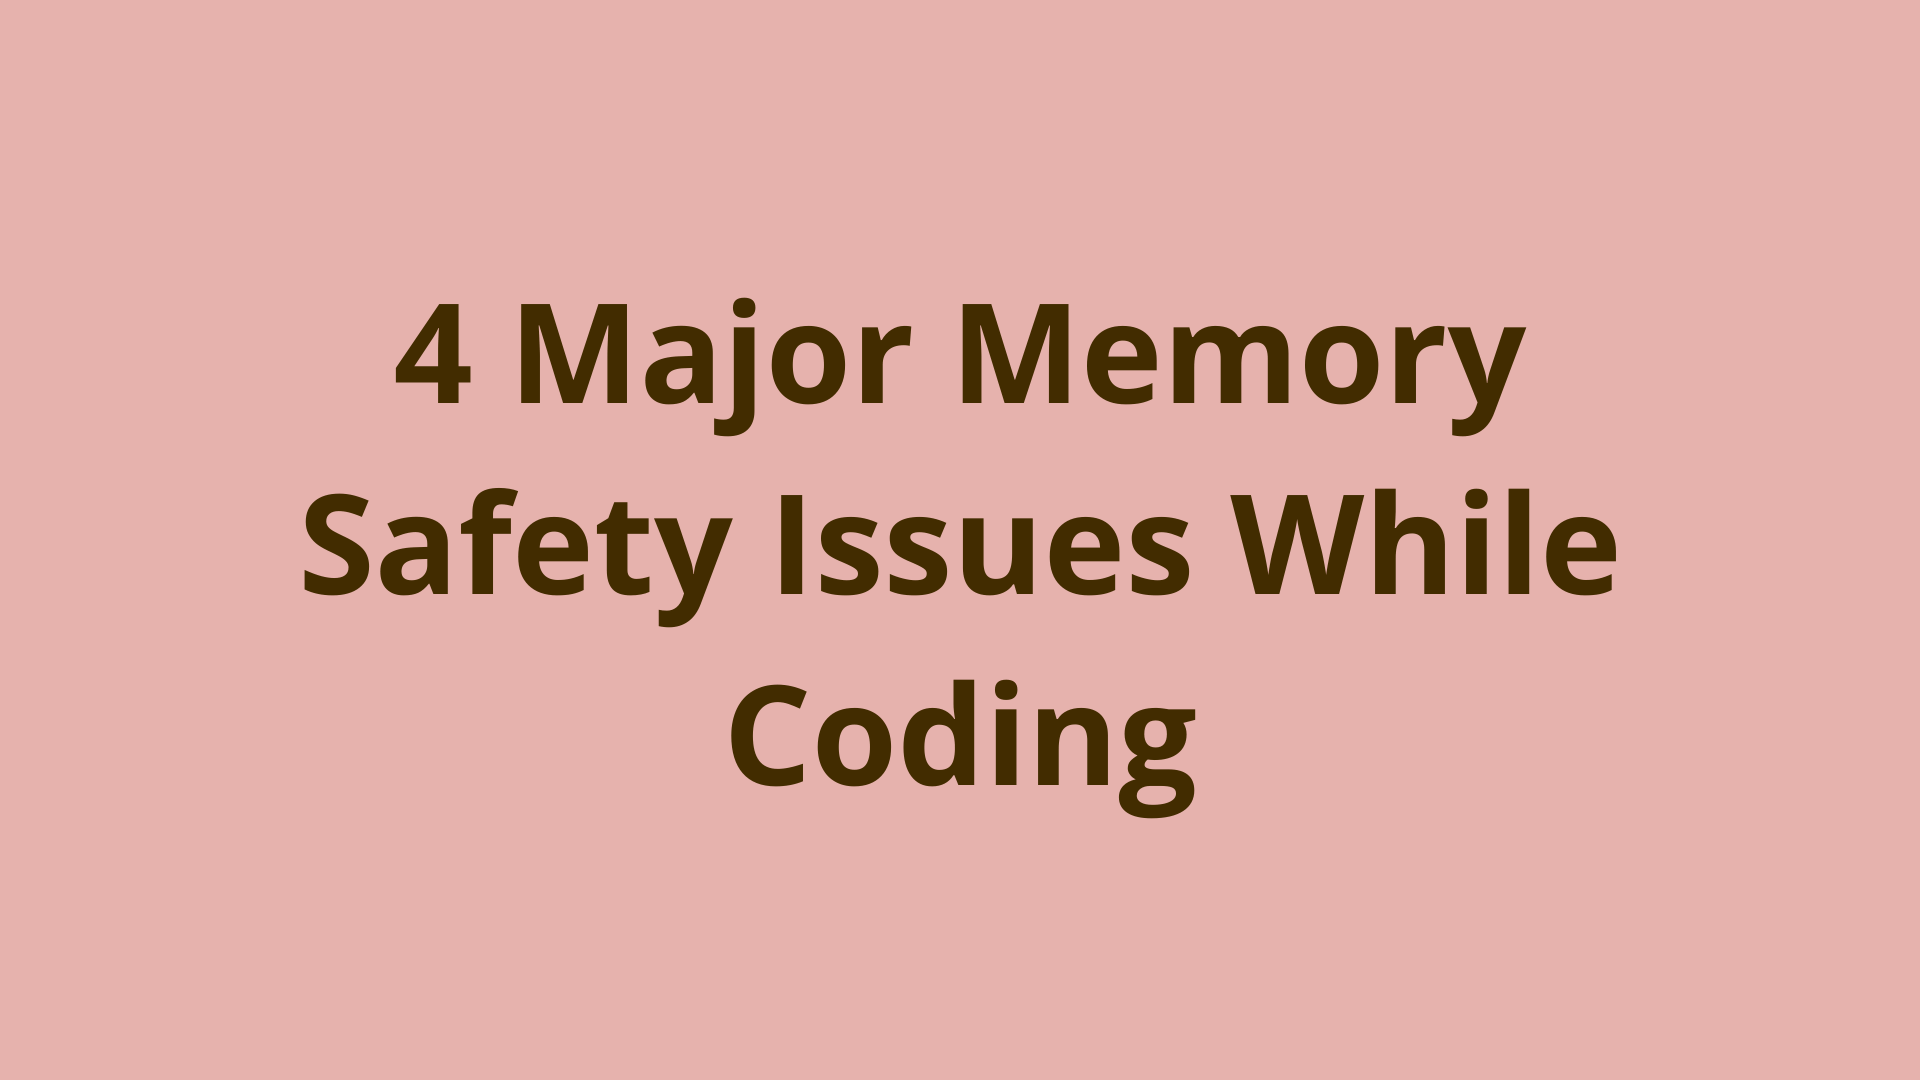 Image of 4 major memory safety issues while coding - causes and solutions